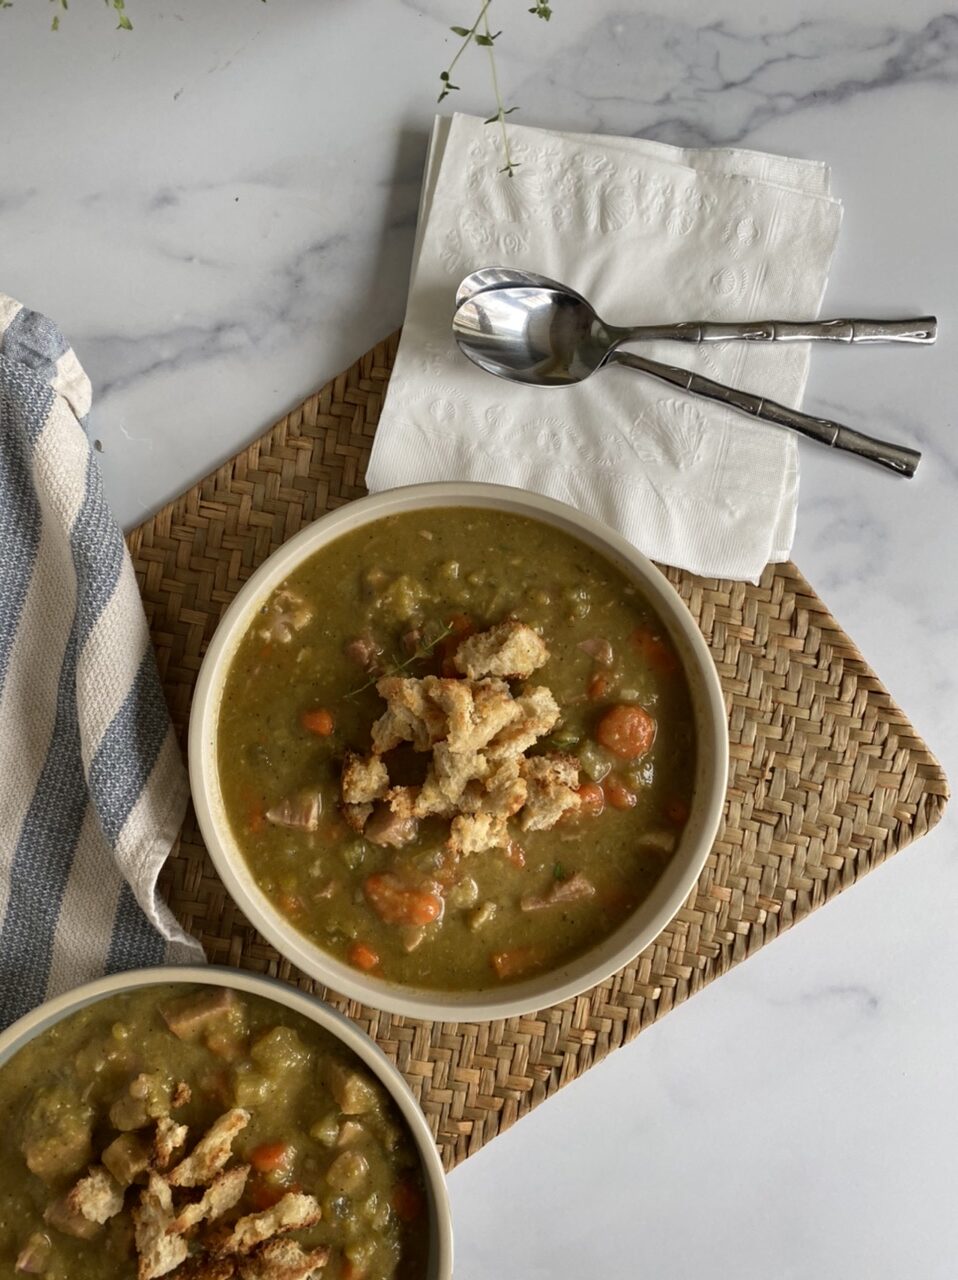 99E291C0 BD4E 45CF 98CA BC6BE5526C06 e1607462930231 - The BEST Split Pea Soup with Homemade Croutons